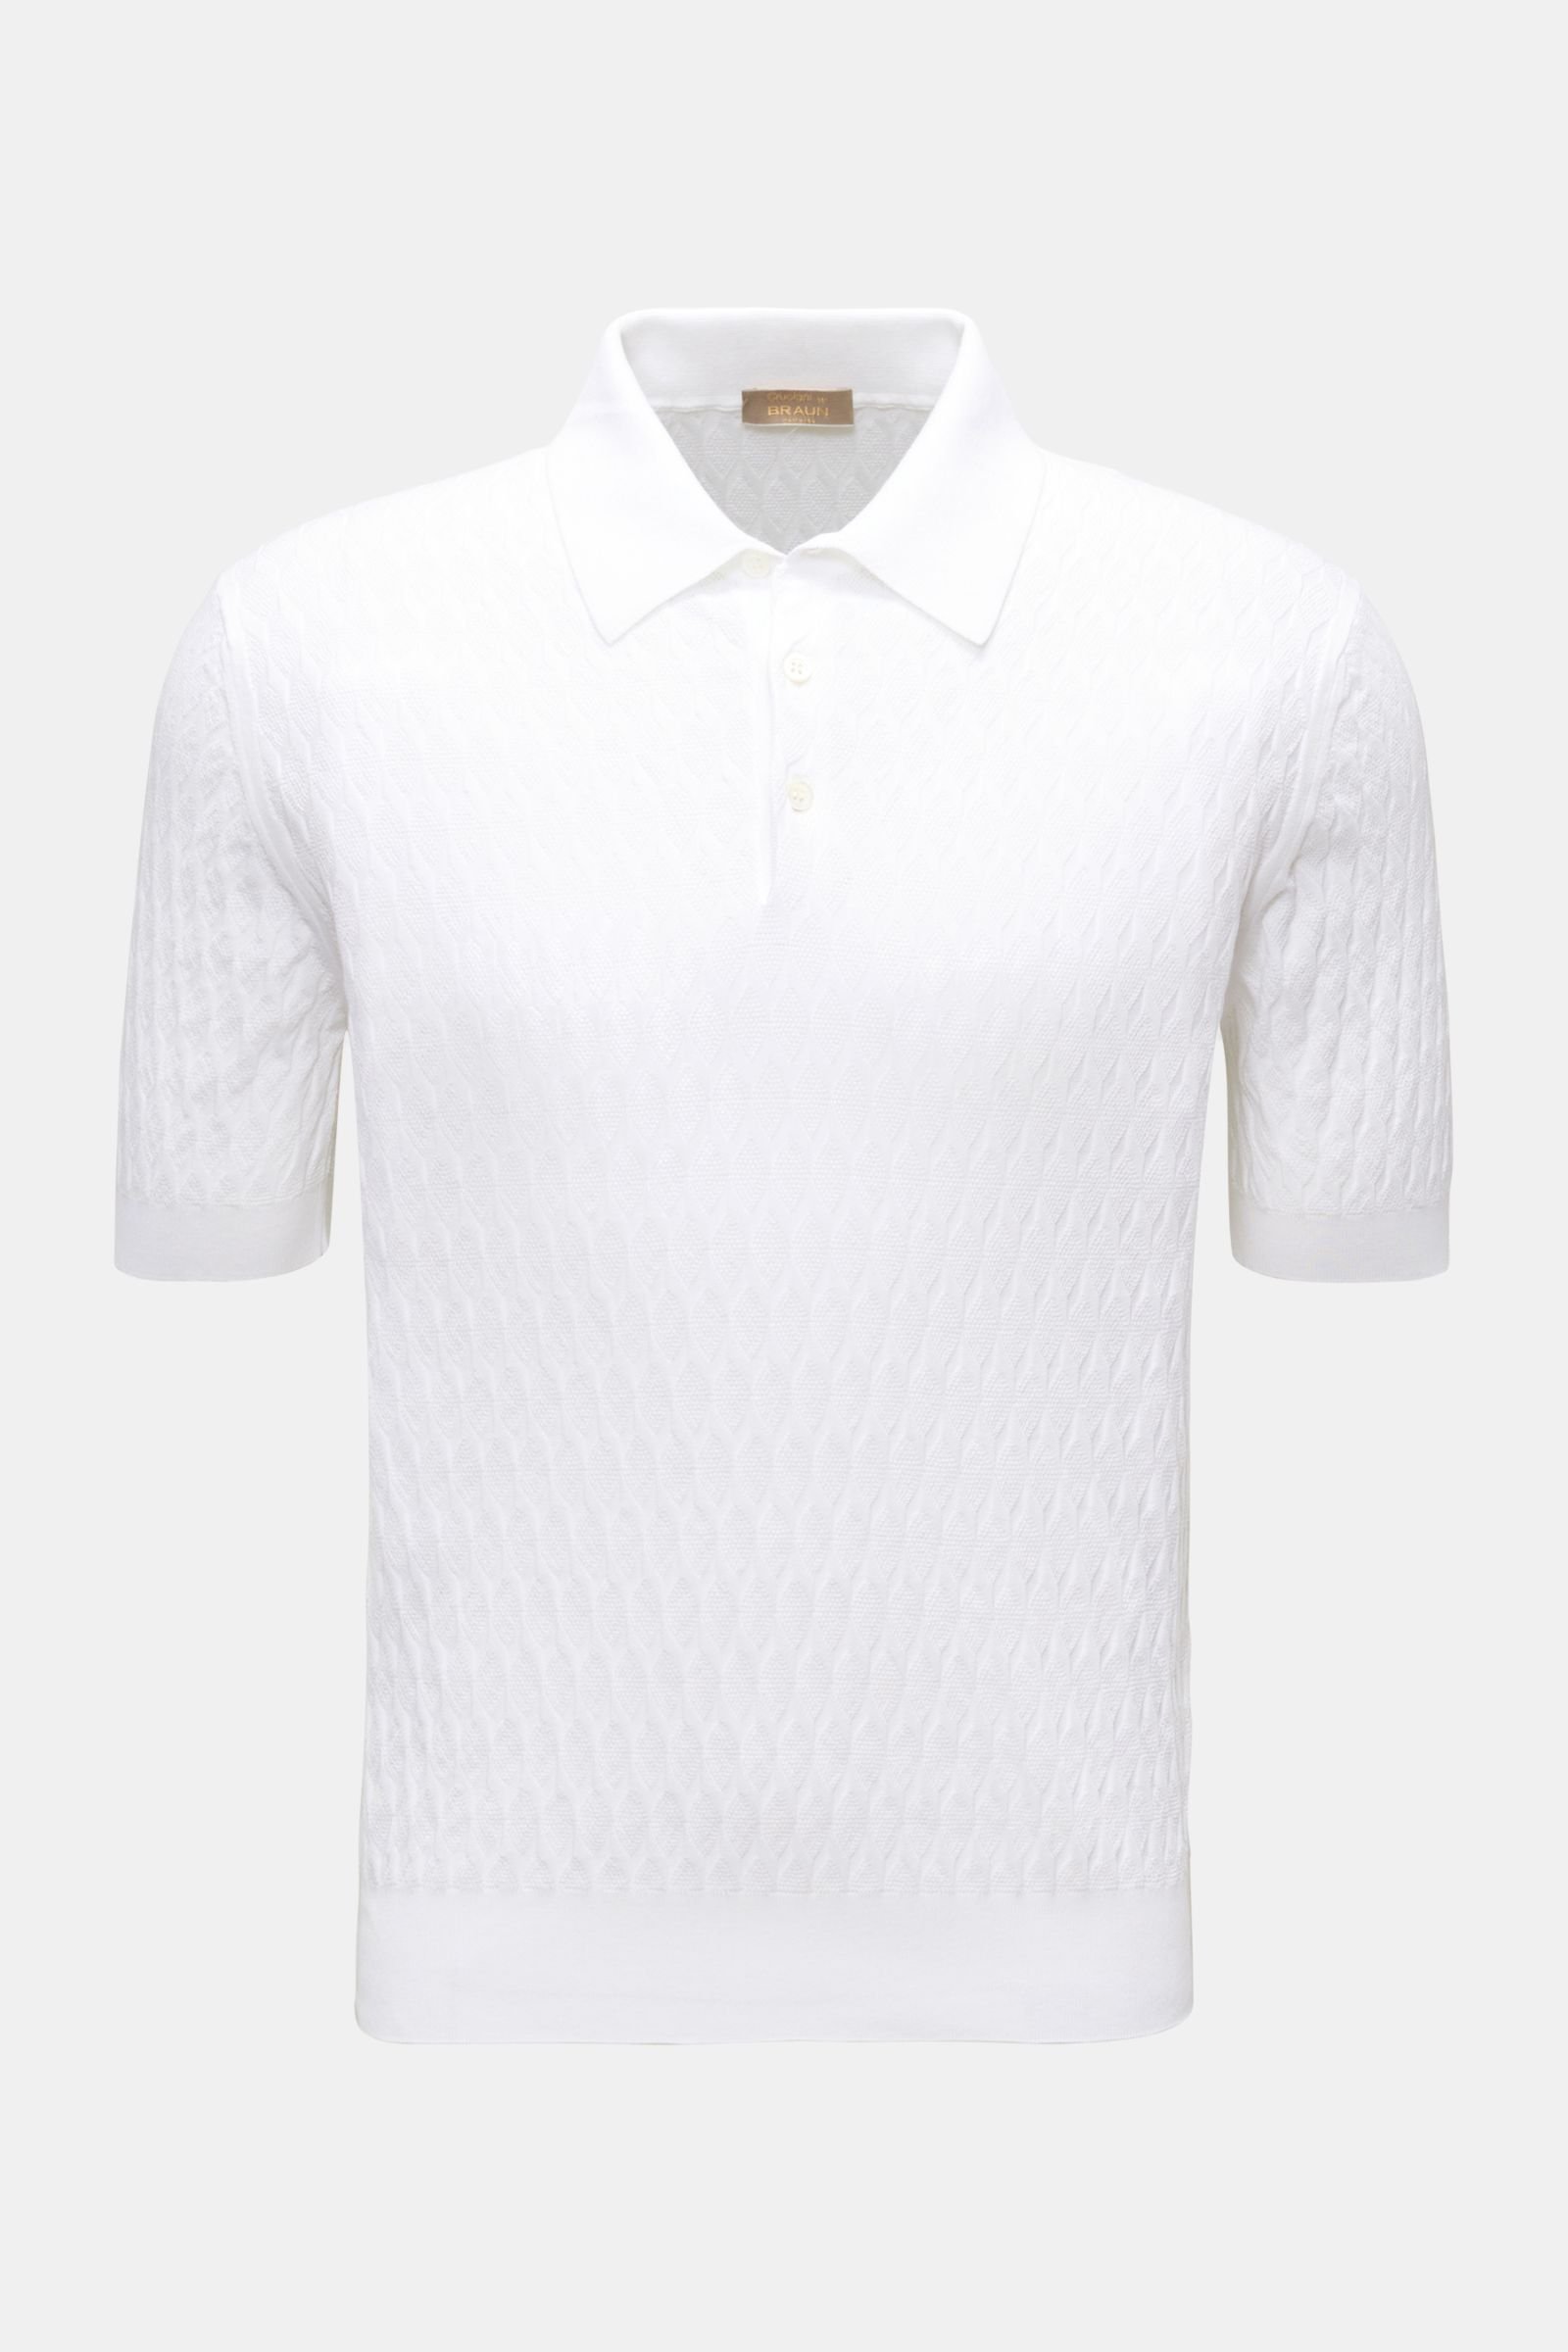 Short sleeve knit polo white patterned